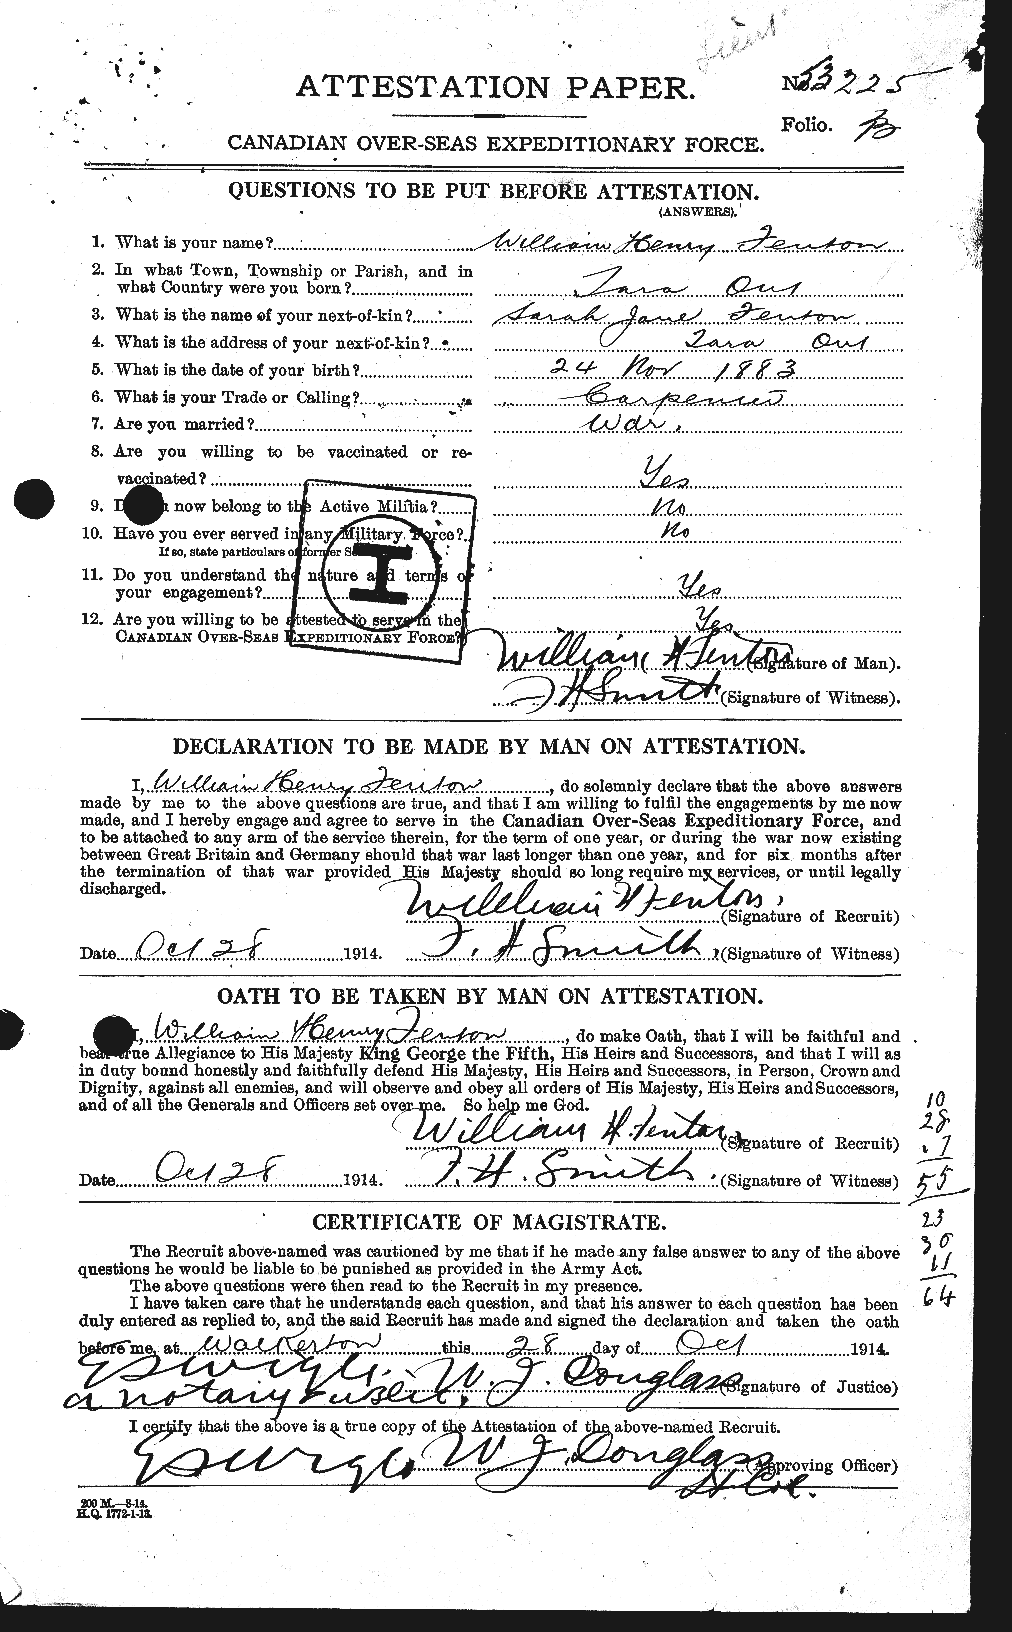 Personnel Records of the First World War - CEF 318571a